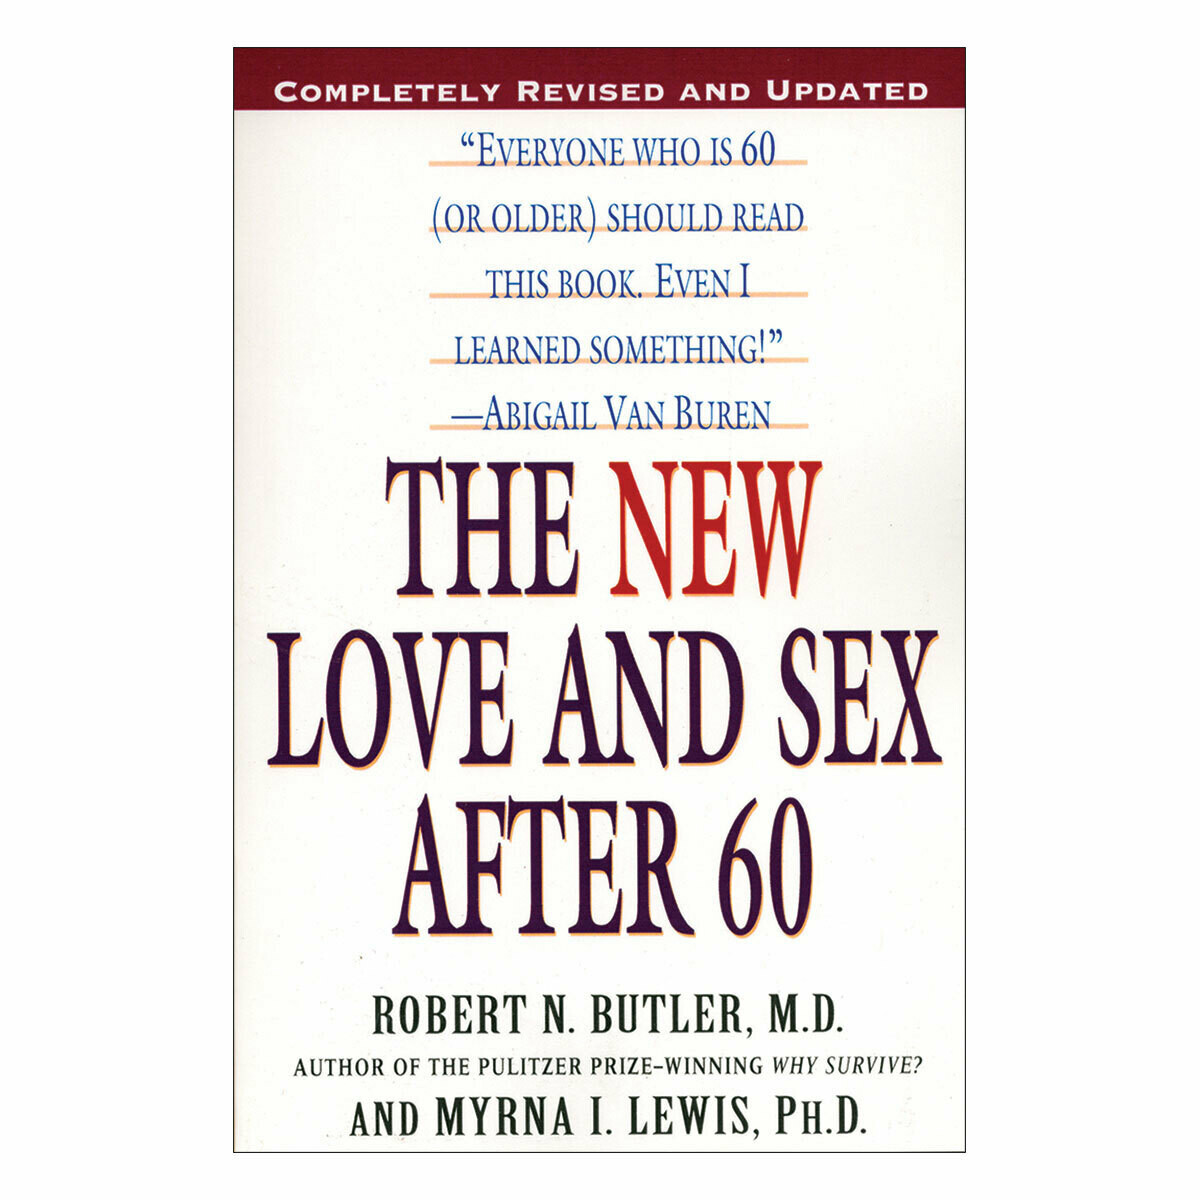 New Love and Sex After 60